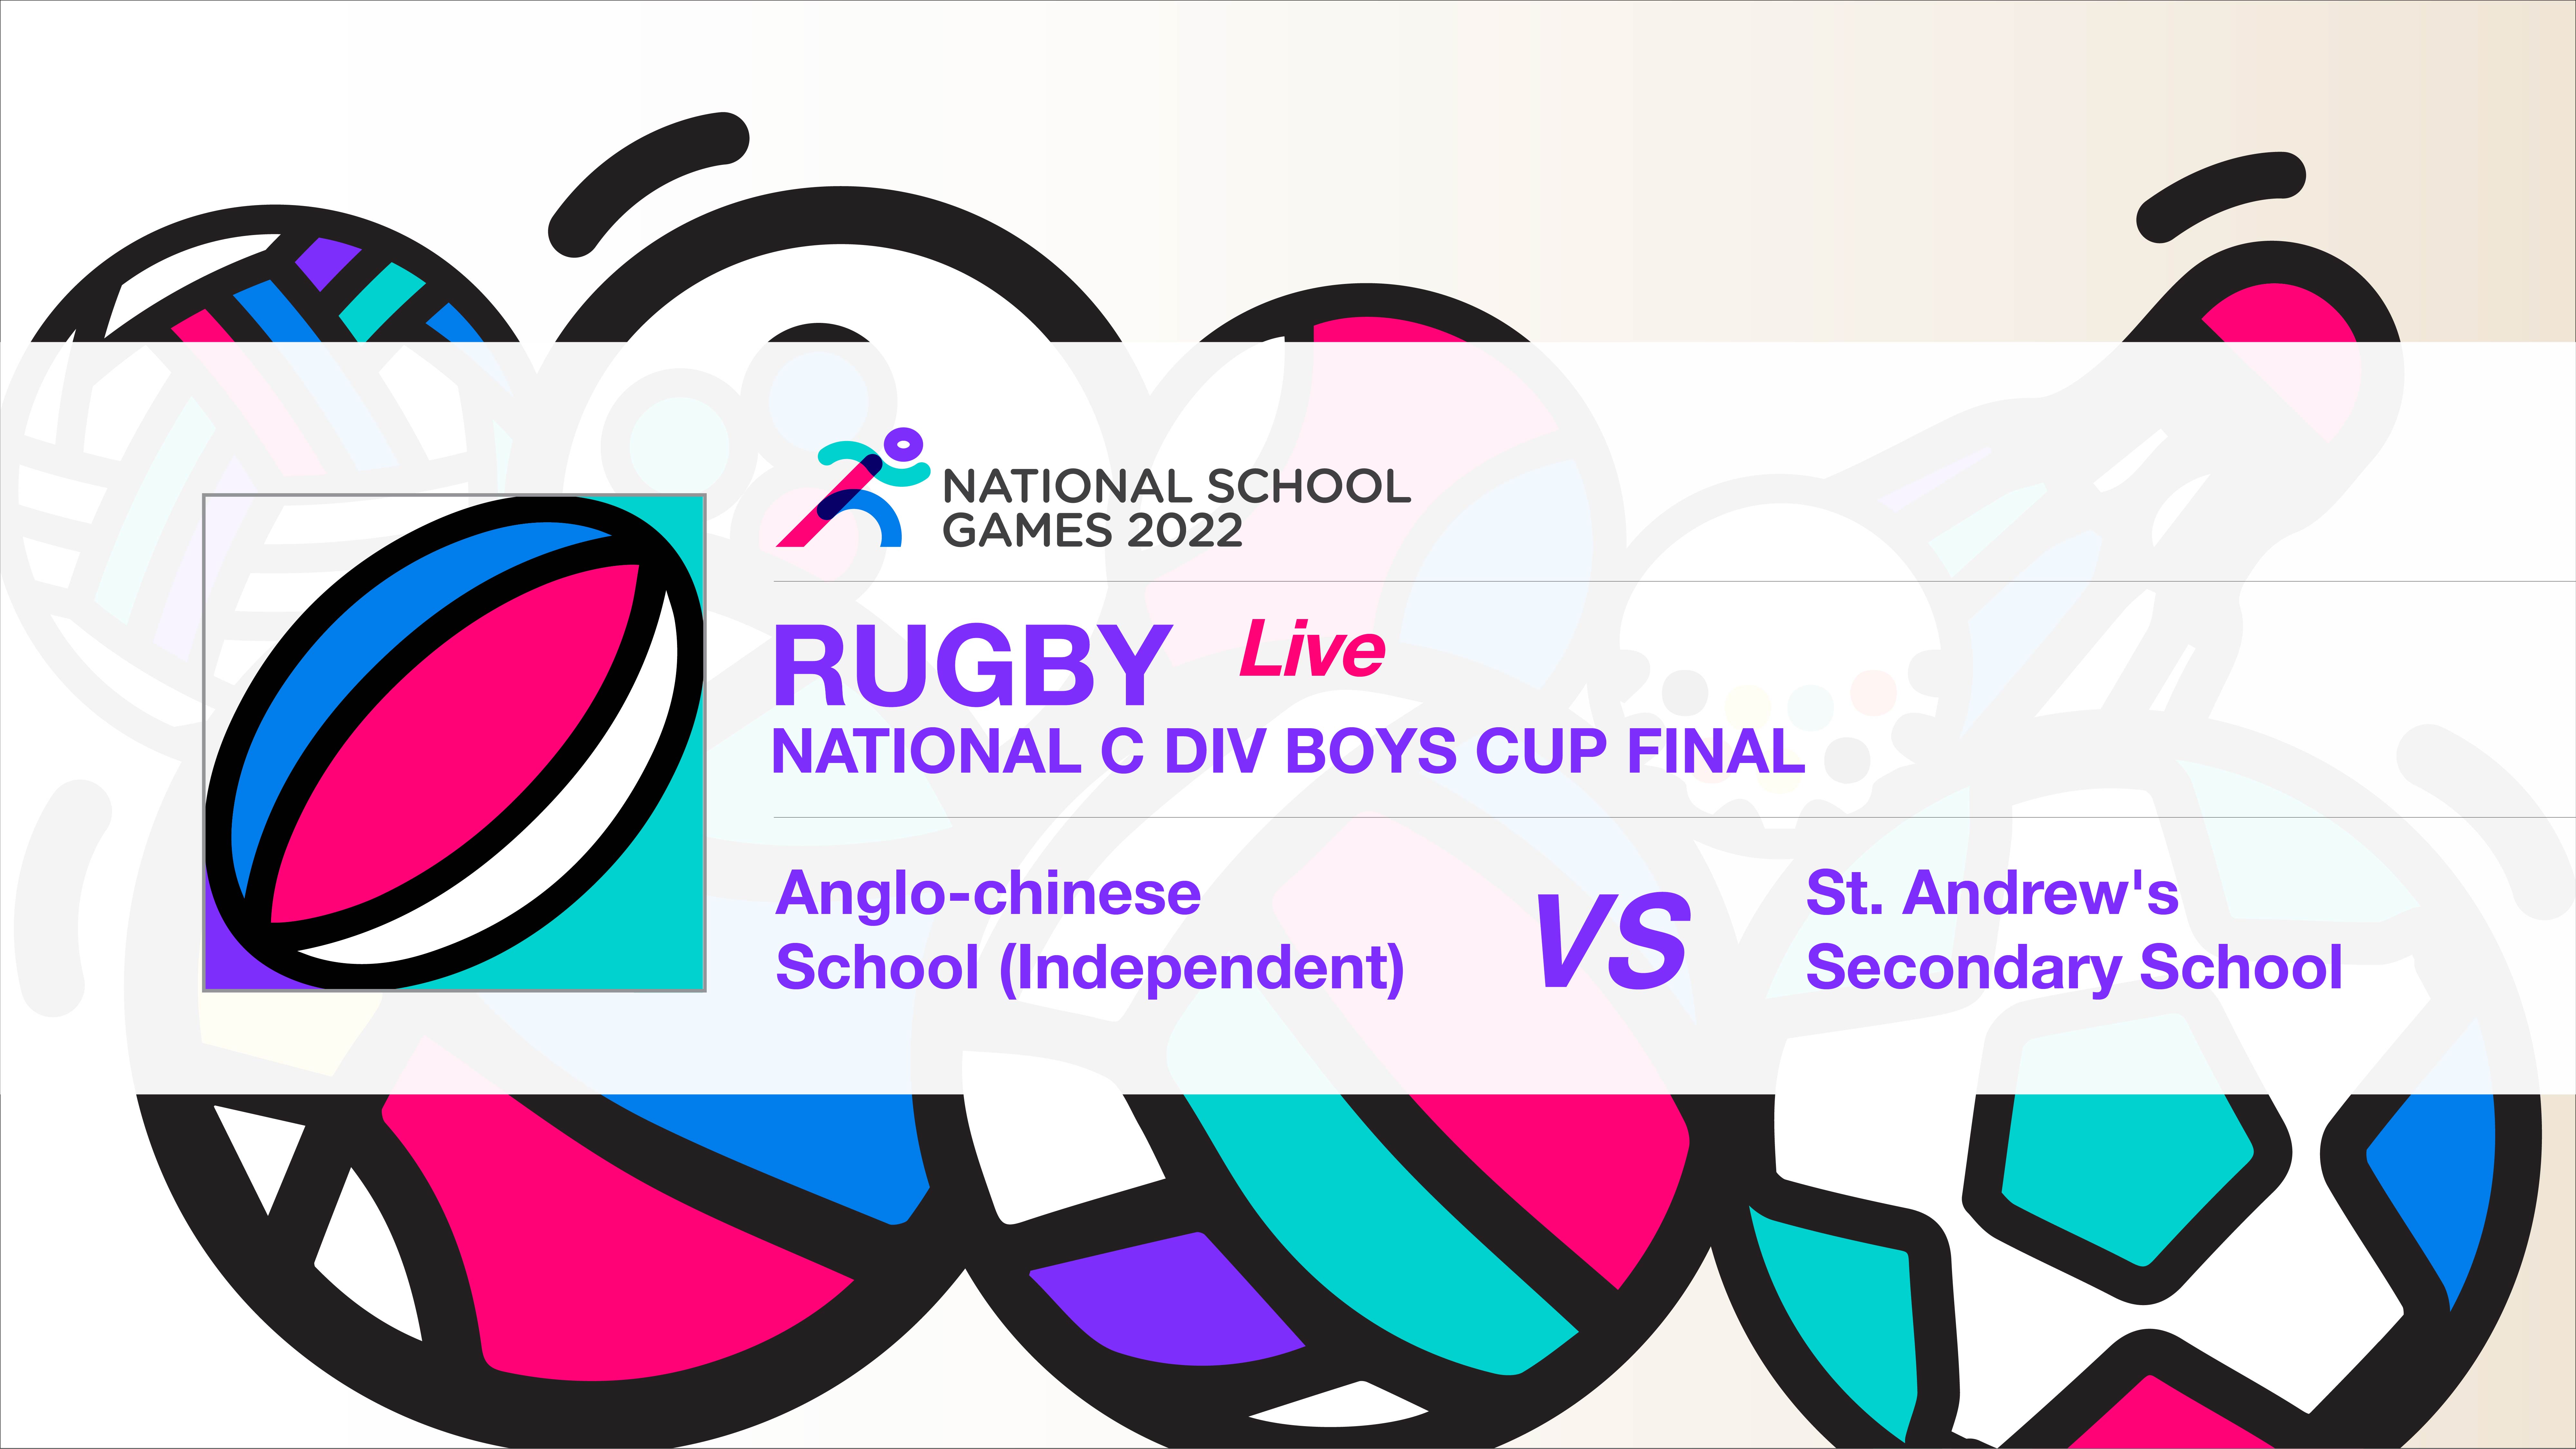 SSSC Rugby National C Division Boys Cup Final | Anglo-Chinese School (Independent) vs St. Andrew's Secondary School